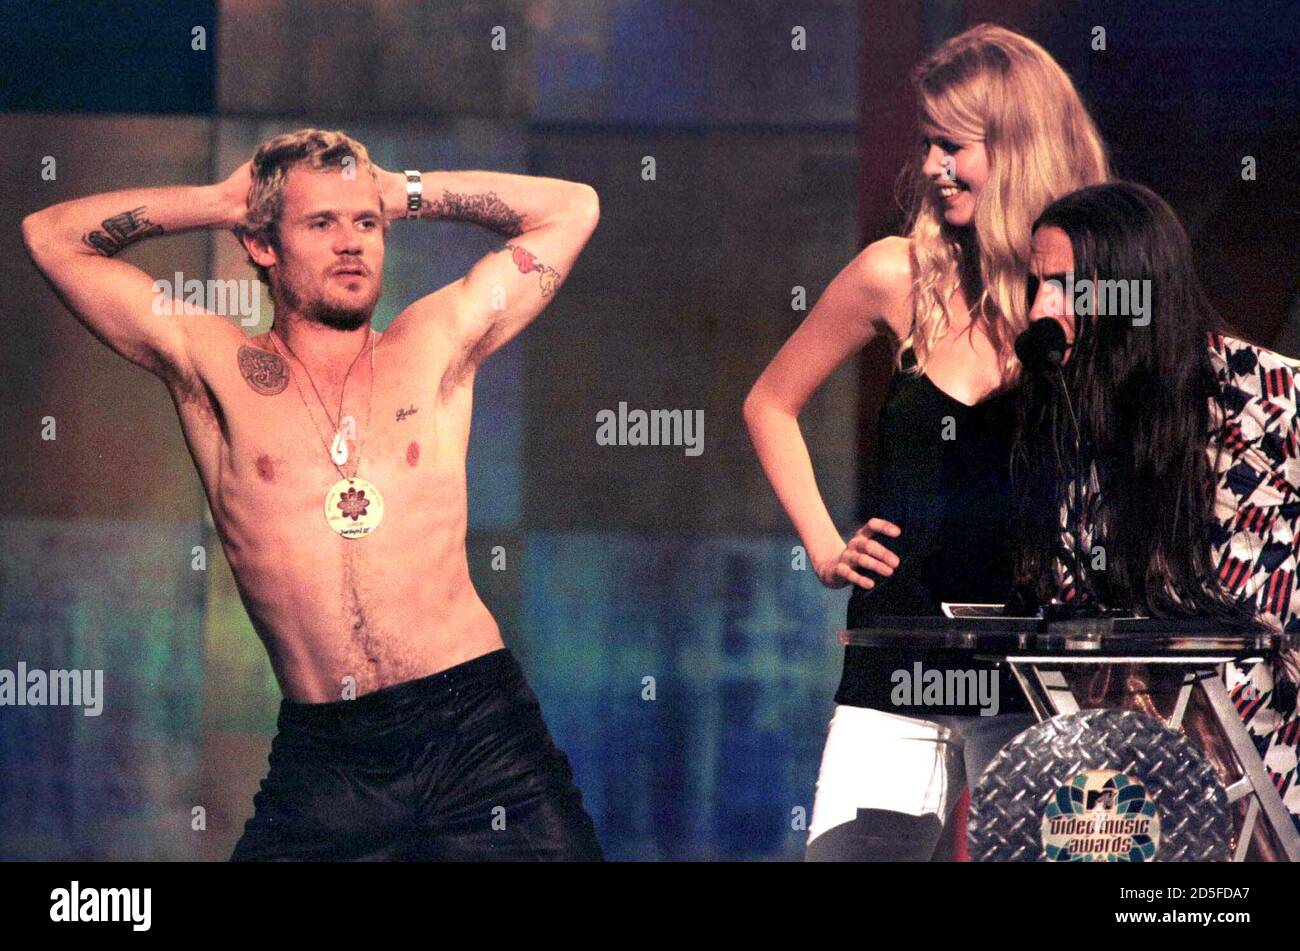 Flea of the Red Hot Chili Peppers (L) dances a strip-tease for model  Claudia Schiffer (C), while fellow bandmember Anthony Kiedis sings at Radio  City Music Hall in New York, September 4,